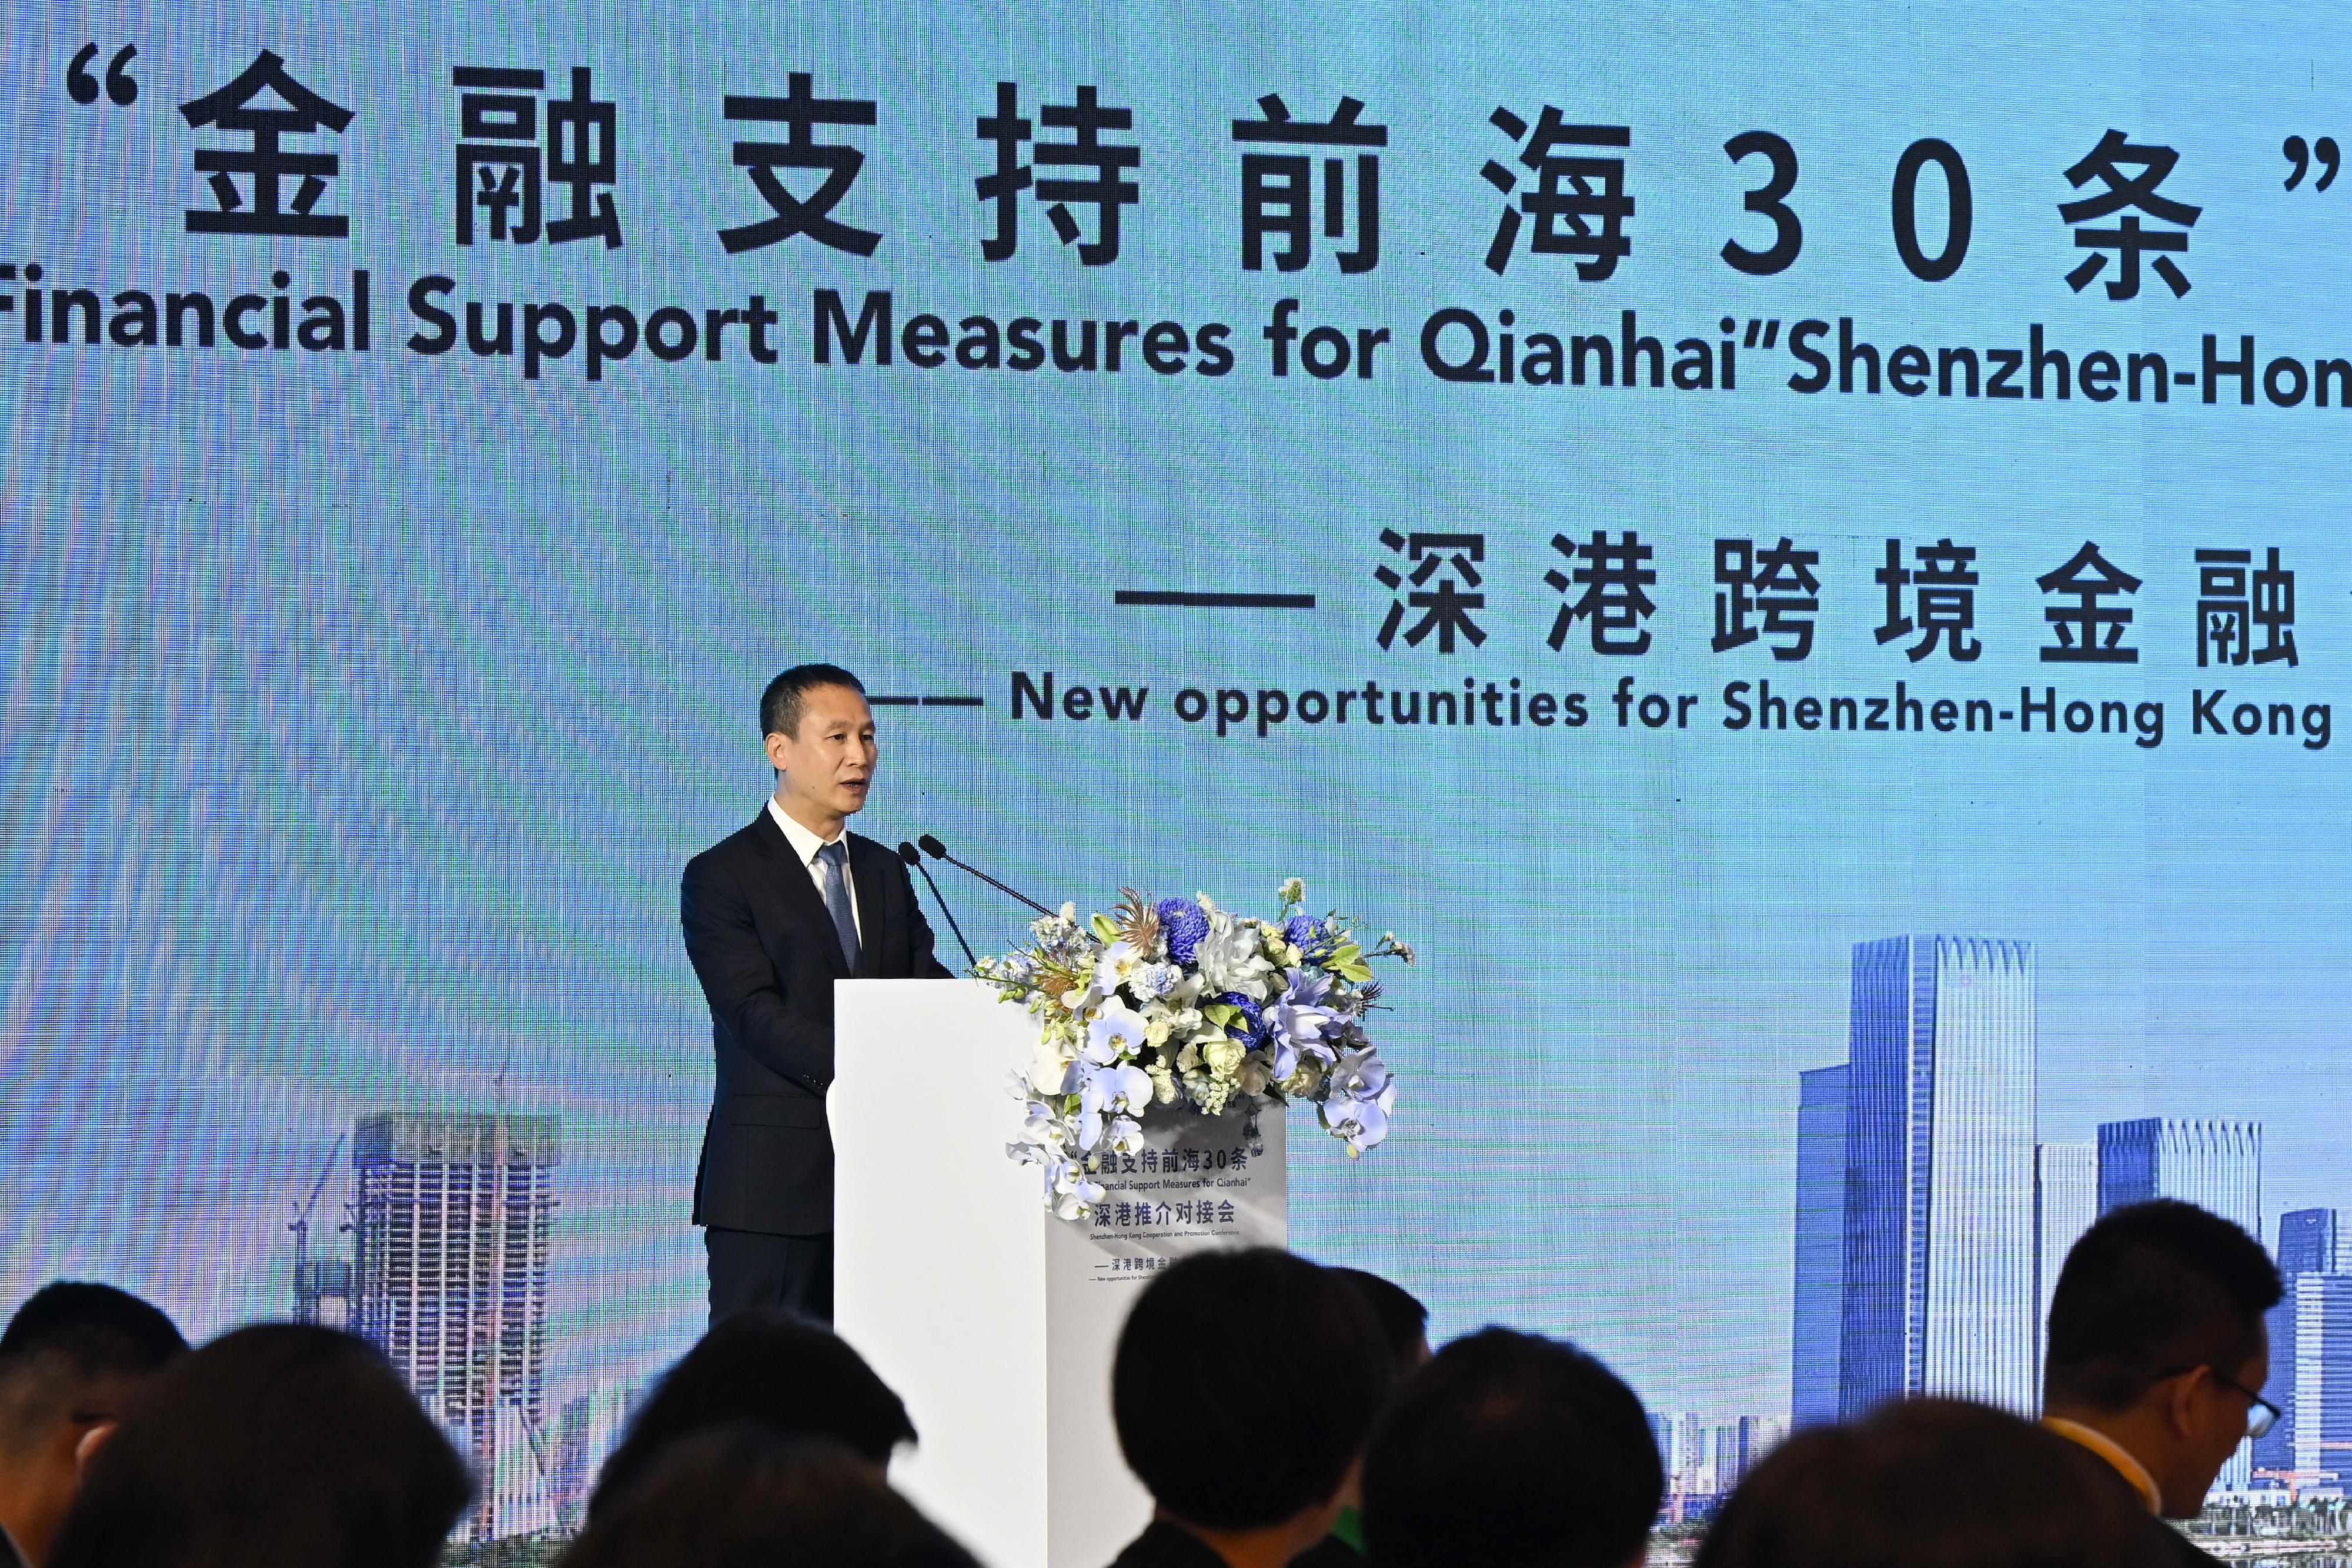 The Secretary for Financial Services and the Treasury, Mr Christopher Hui, led a Hong Kong financial sector delegation to attend a Shenzhen-Hong Kong liaison event on promoting 30 Financial Support Measures for Qianhai held in Shenzhen today (May 18). Photo shows member of the Standing Committee of the Shenzhen Municipal Committee of the Chinese Communist Party and Director General of the Authority of Qianhai Shenzhen-Hong Kong Modern Service Industry Cooperation Zone of Shenzhen Municipality, Mr Zeng Pai, giving a speech at the event. 
